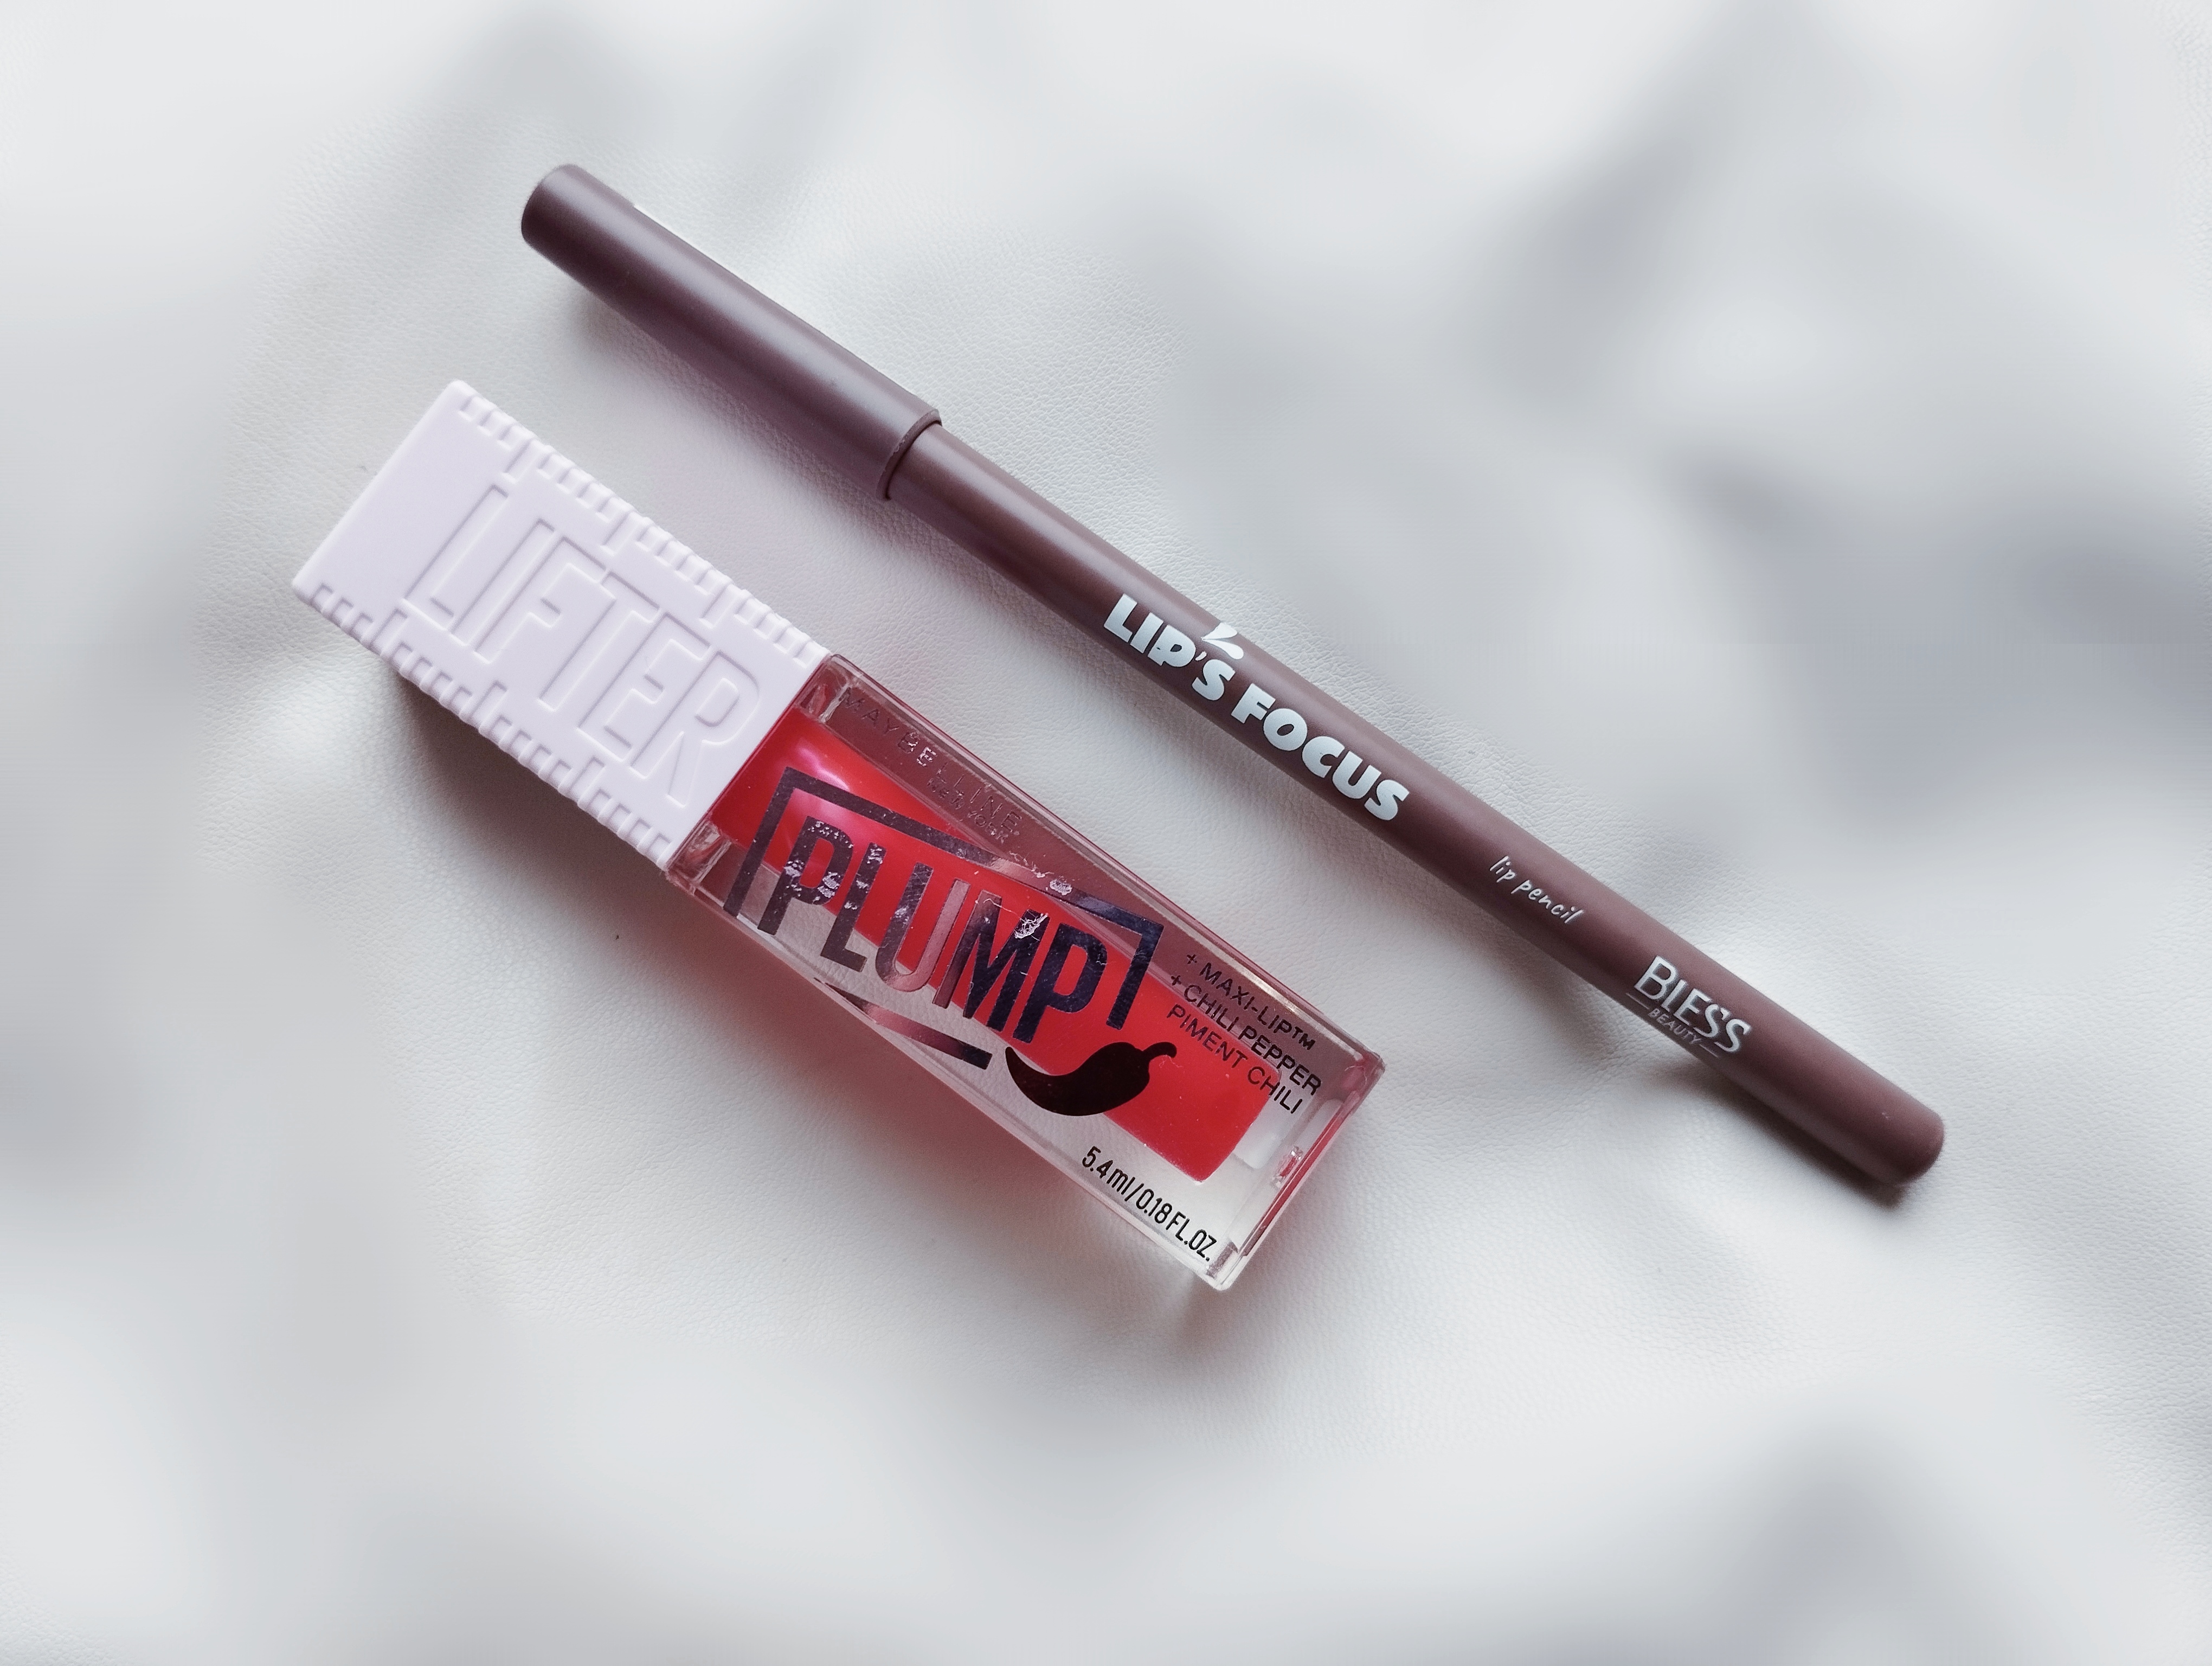 Bless beauty 10 Cocoa + Maybelline Lifter Plump